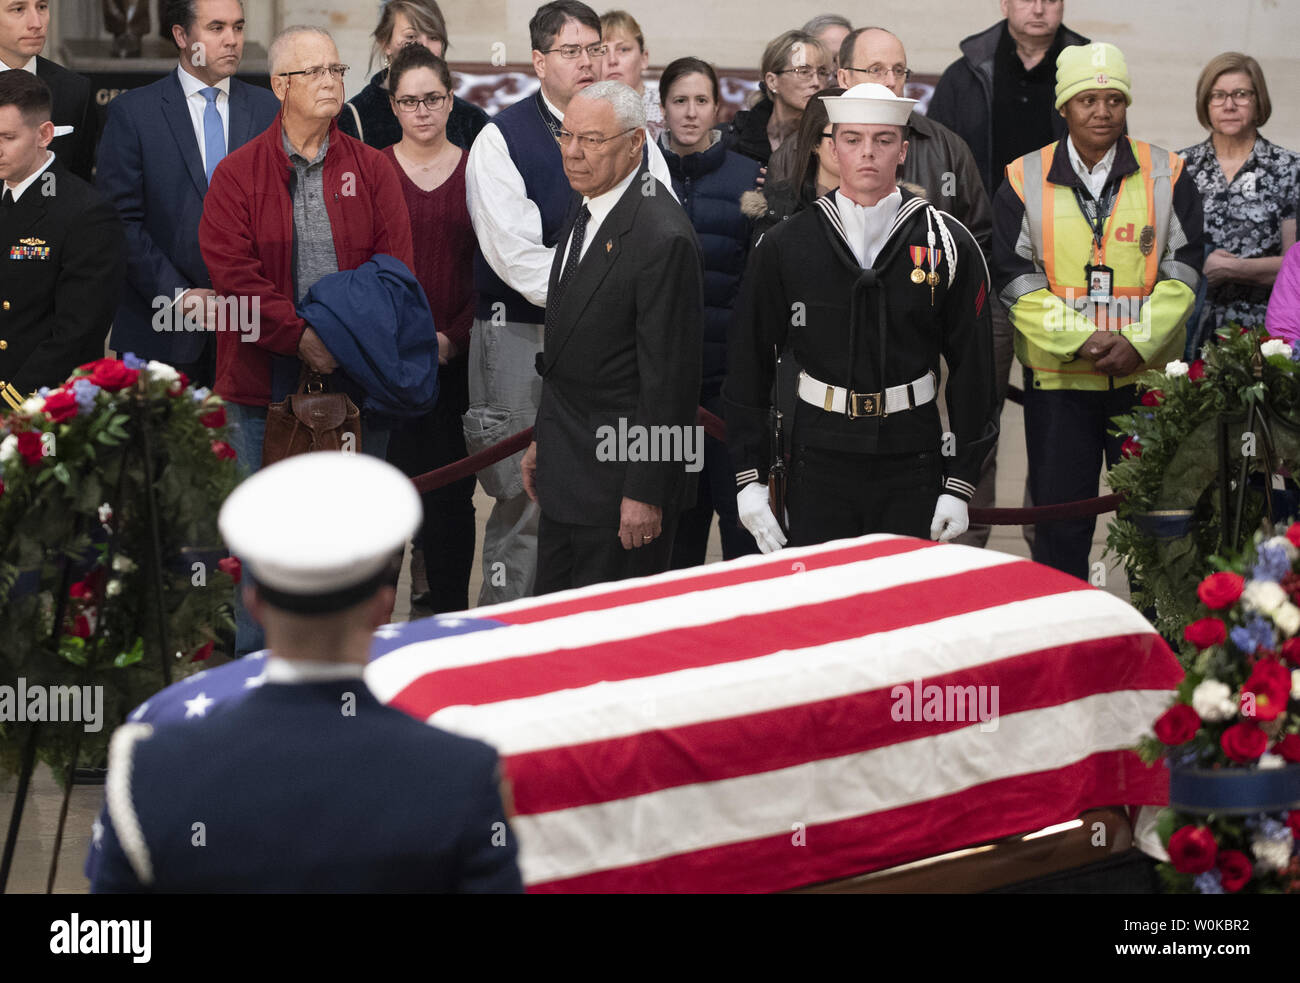 Colin Powell, former secretary of state and general of the first Gulf War (Desert Storm) under former President George H. W. Bush,  views the coffin of the 41st president as he lies in state at the U.S. Capitol Rotunda, in Washington, D.C. on December 4, 2018.  There will be a State Funeral at the National Cathedral on Wednesday, December 5, 2018.   Photo by Pat Benic/UPI Stock Photo